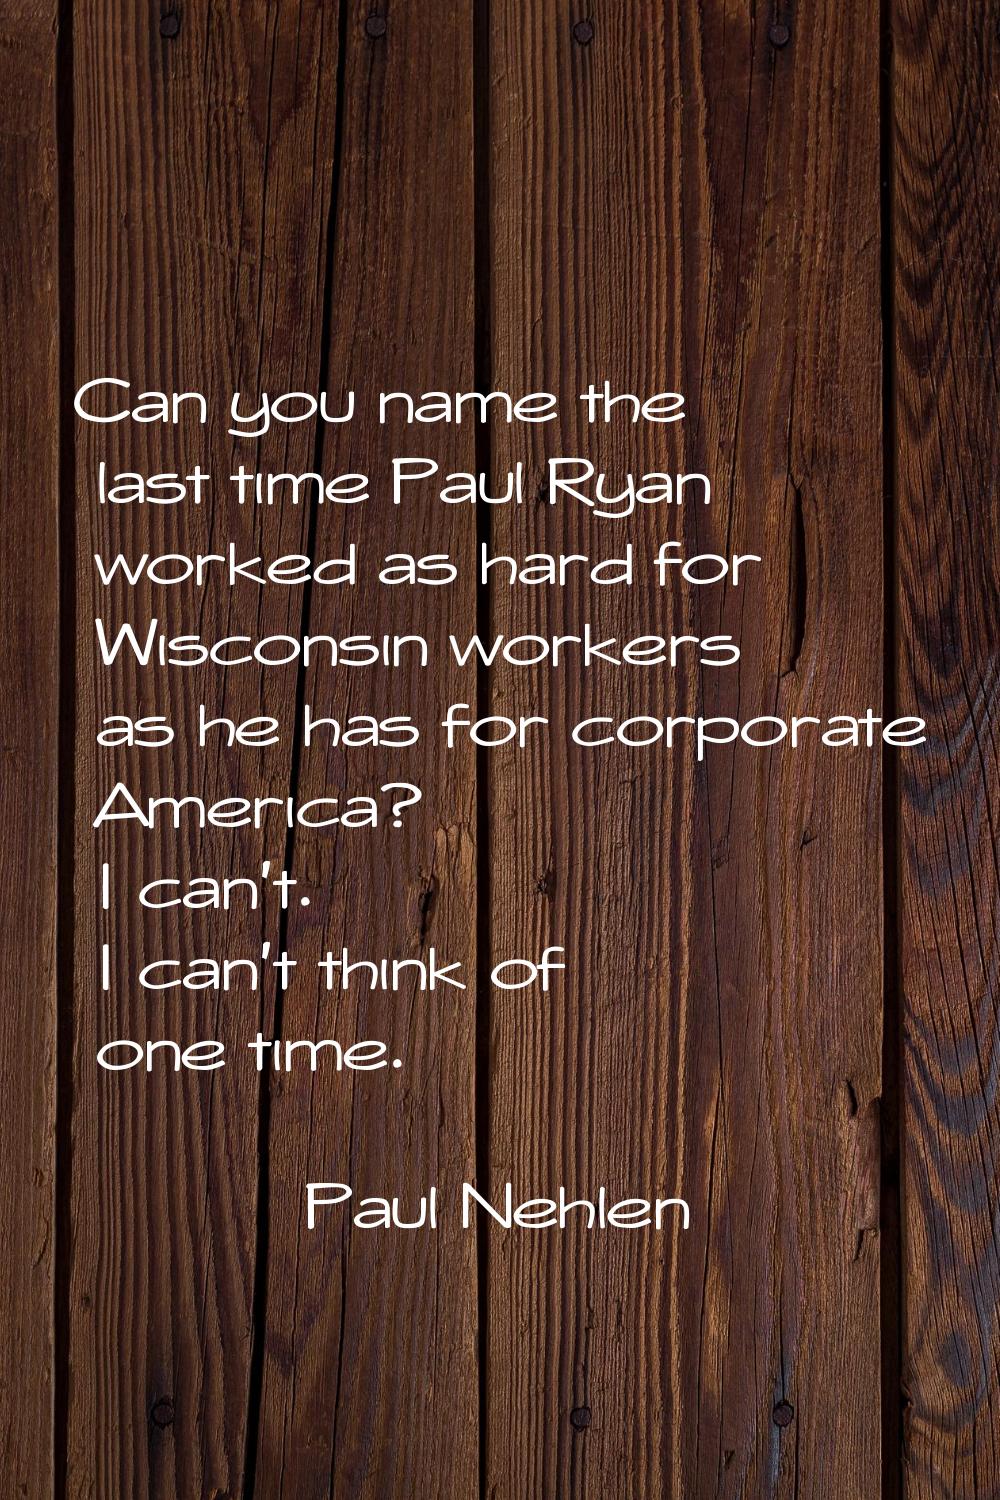 Can you name the last time Paul Ryan worked as hard for Wisconsin workers as he has for corporate A